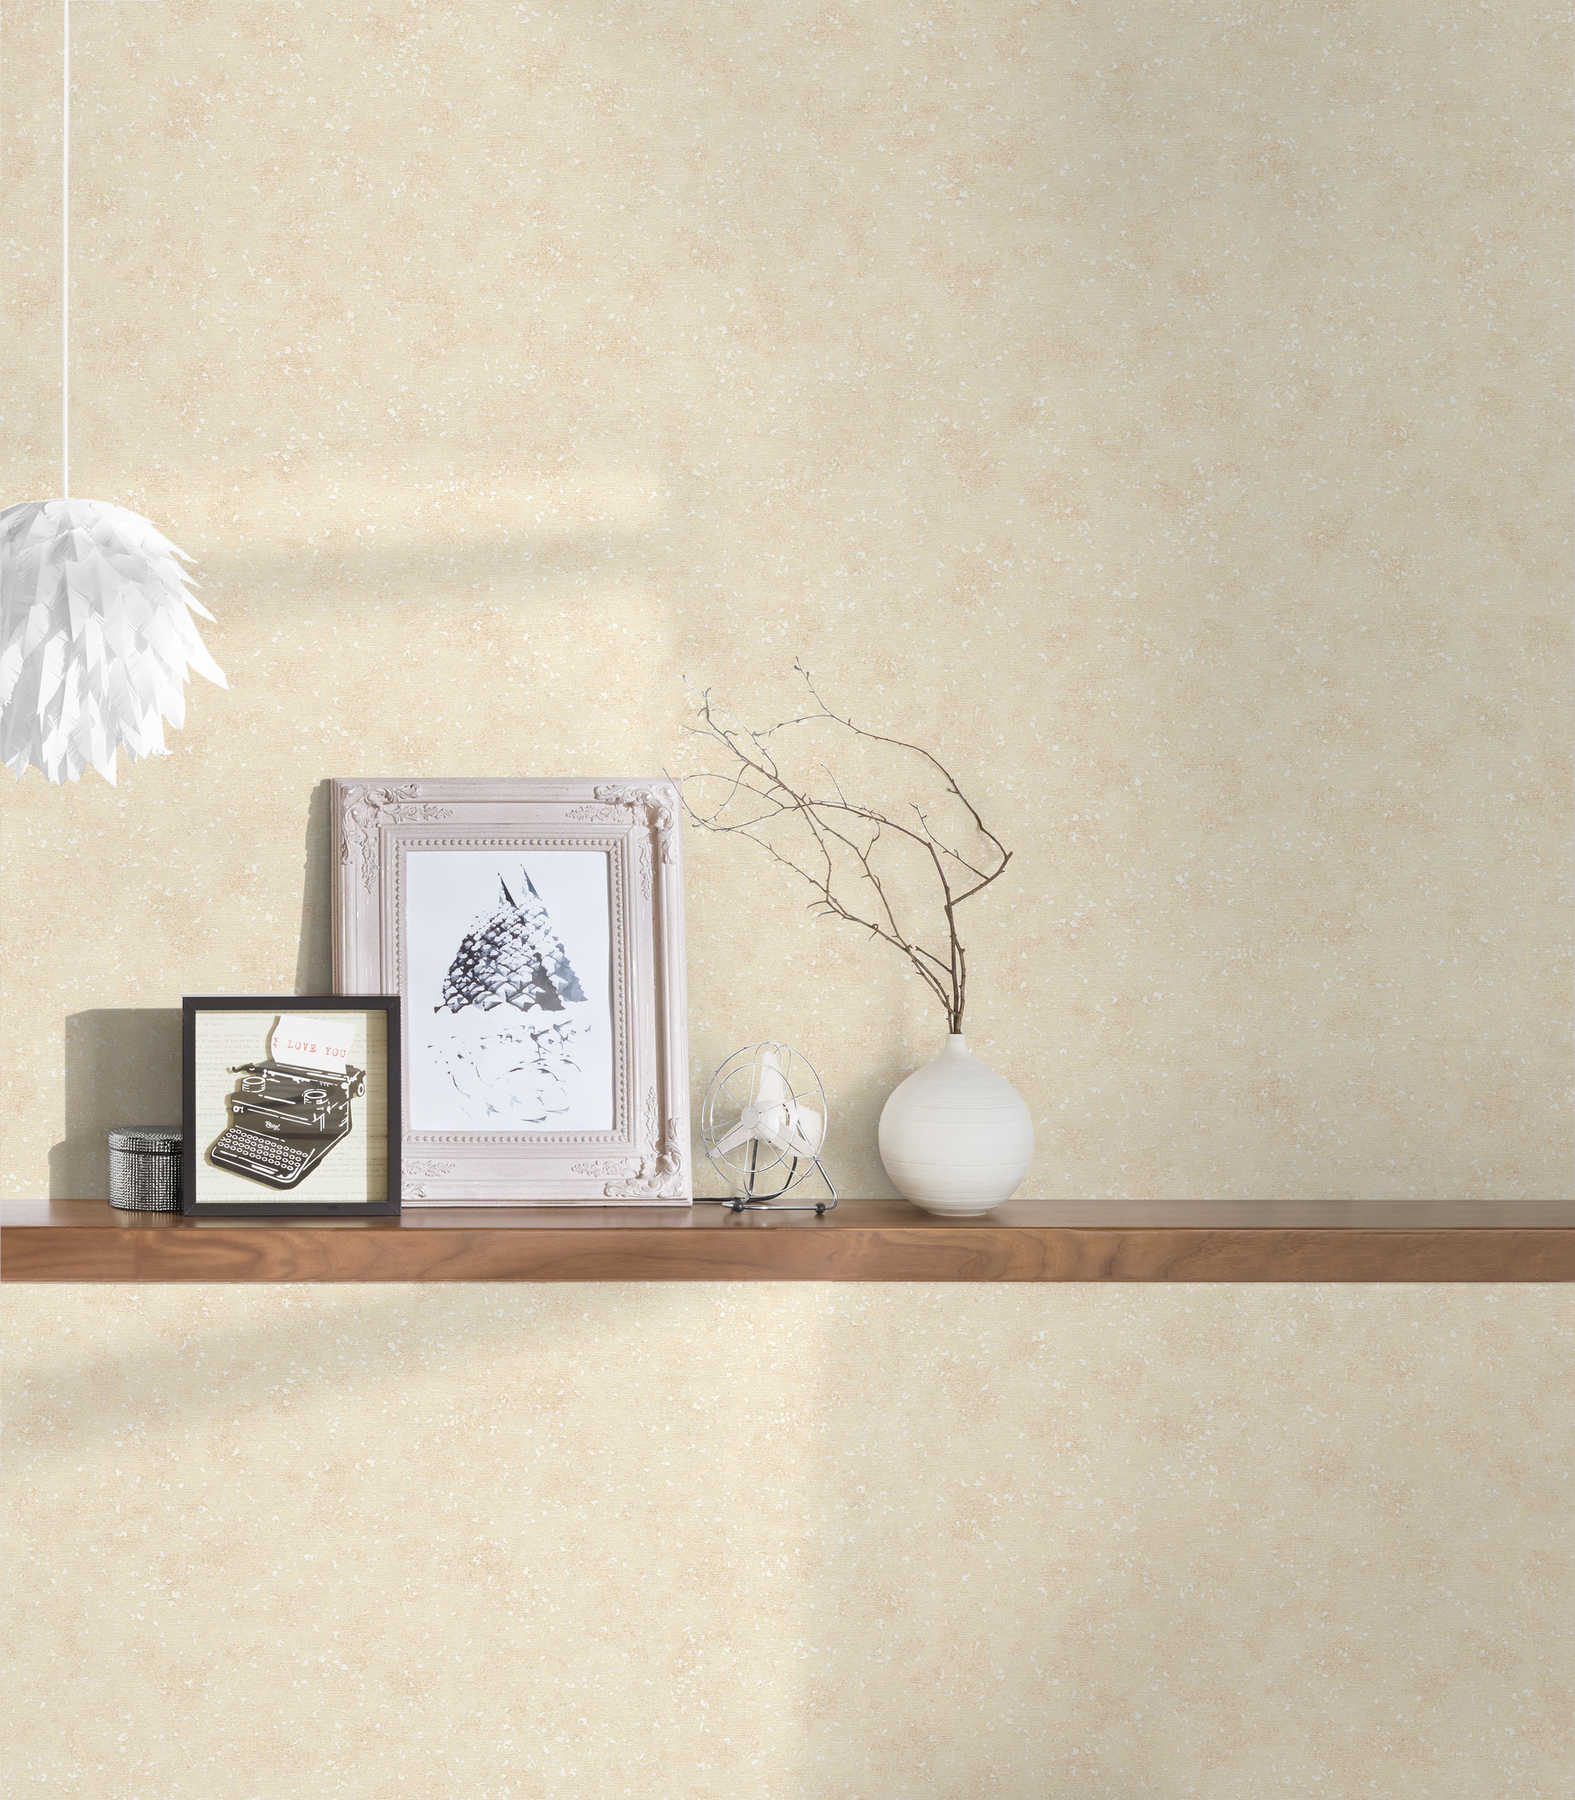             Plain wallpaper cream speckled with colour pattern
        